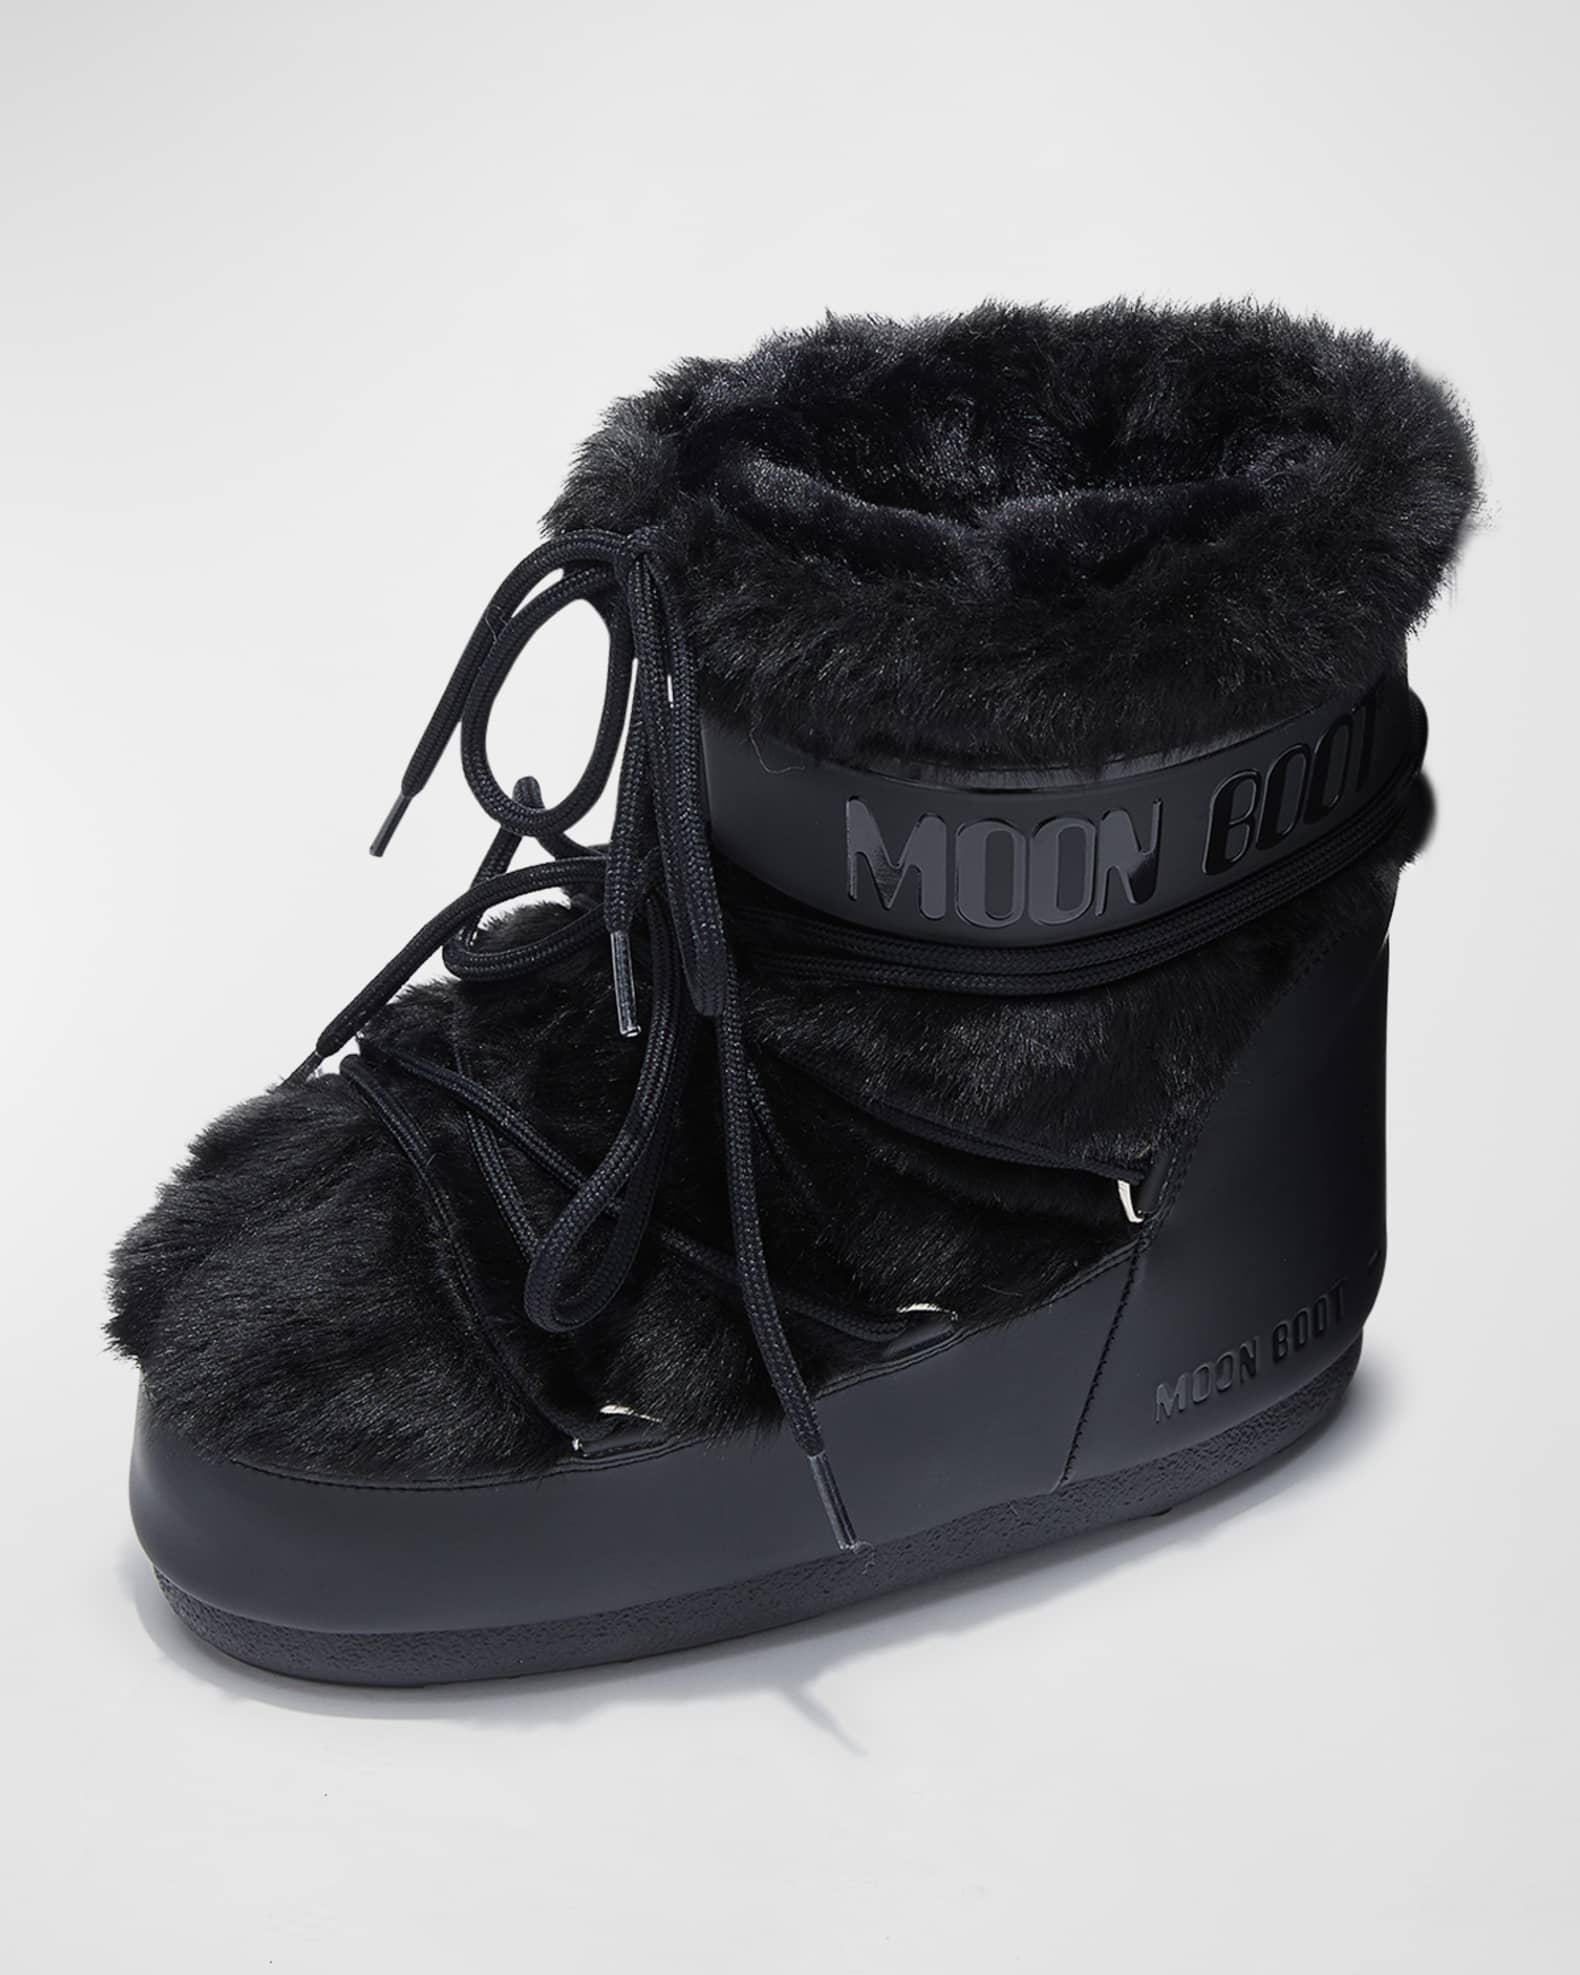 Moon Boot Women's Icon Water Resistant Faux Fur Moon Boot